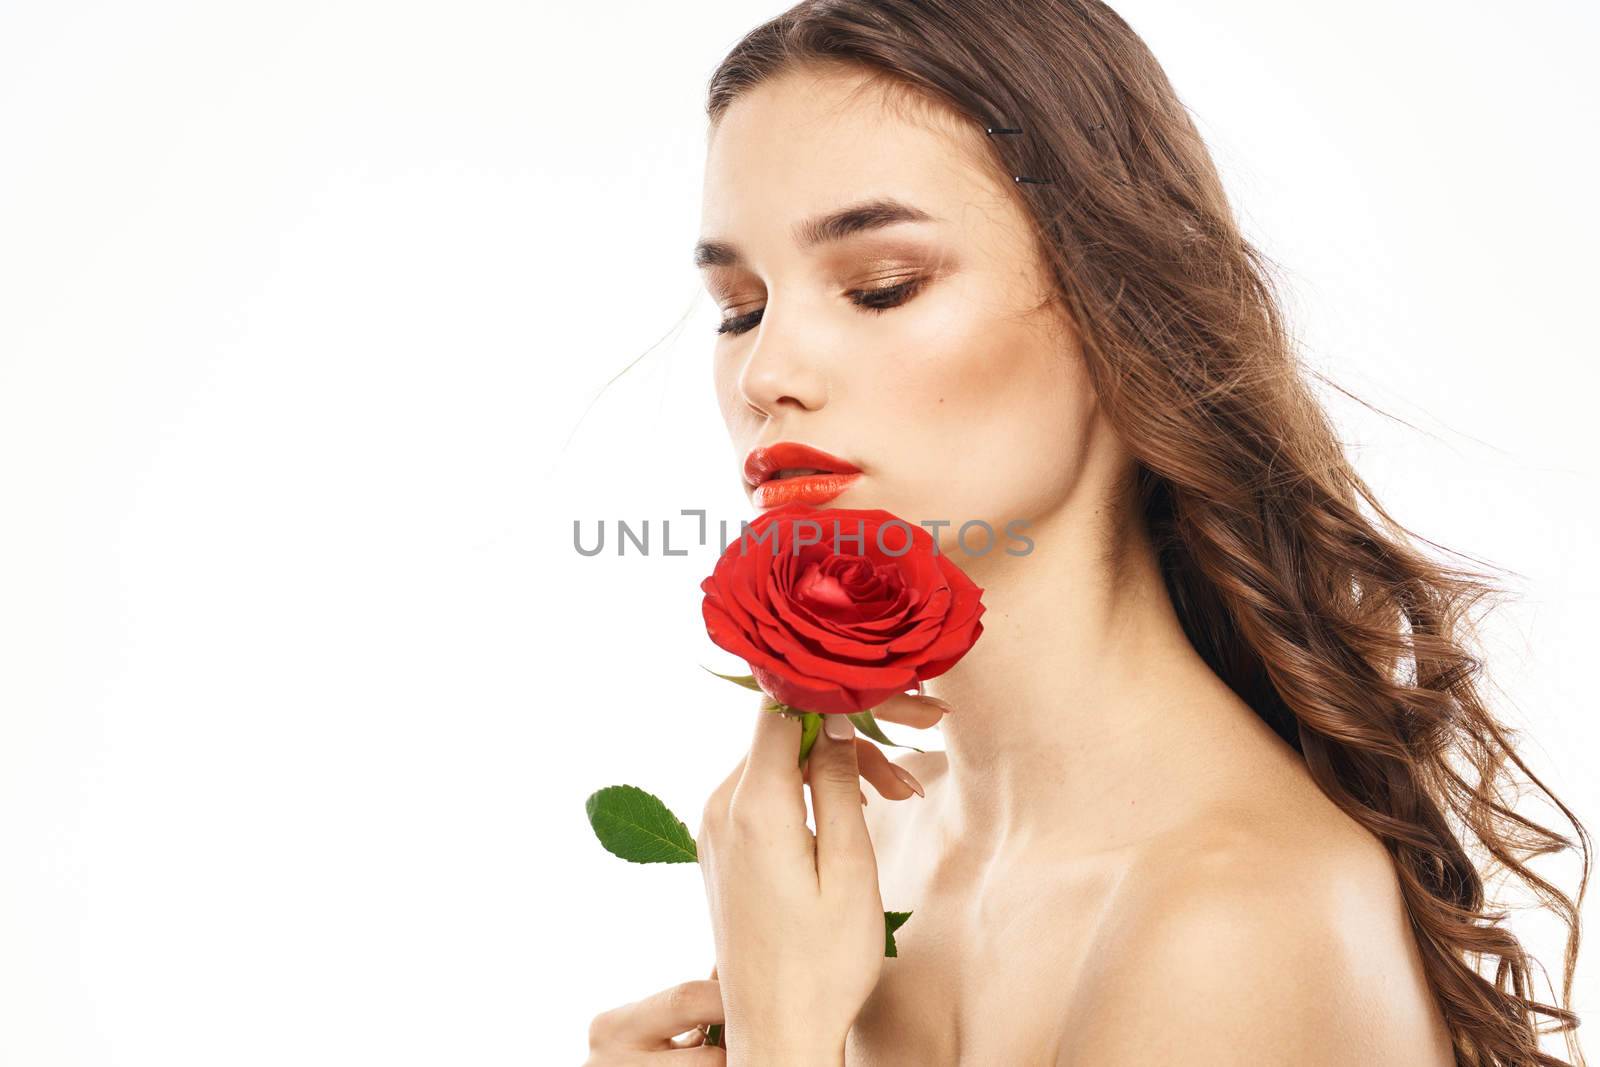 Woman with naked shoulders and red rose evening makeup light background by SHOTPRIME